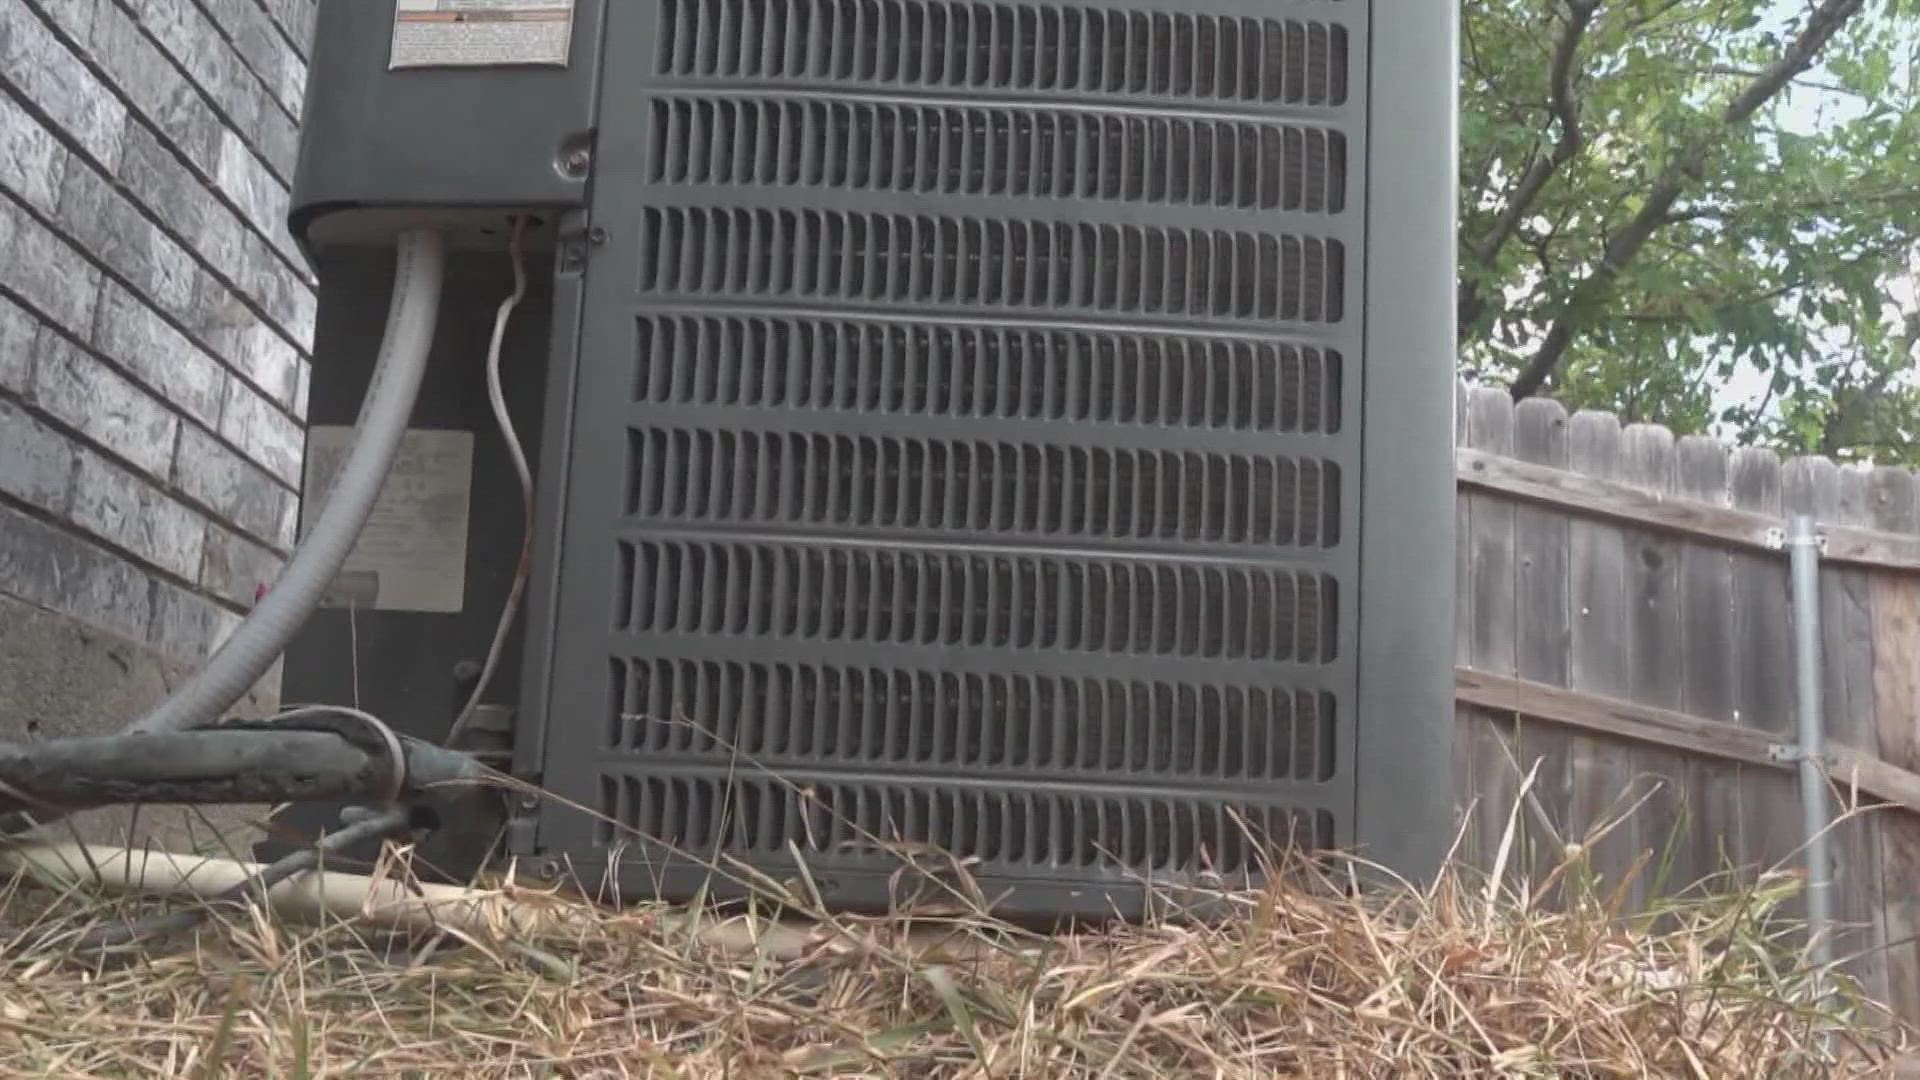 Catrina Jackson's A/C went out July 14. She called her home warranty company, but a month later, no repair in sight. So, she called 6 Fix for help.